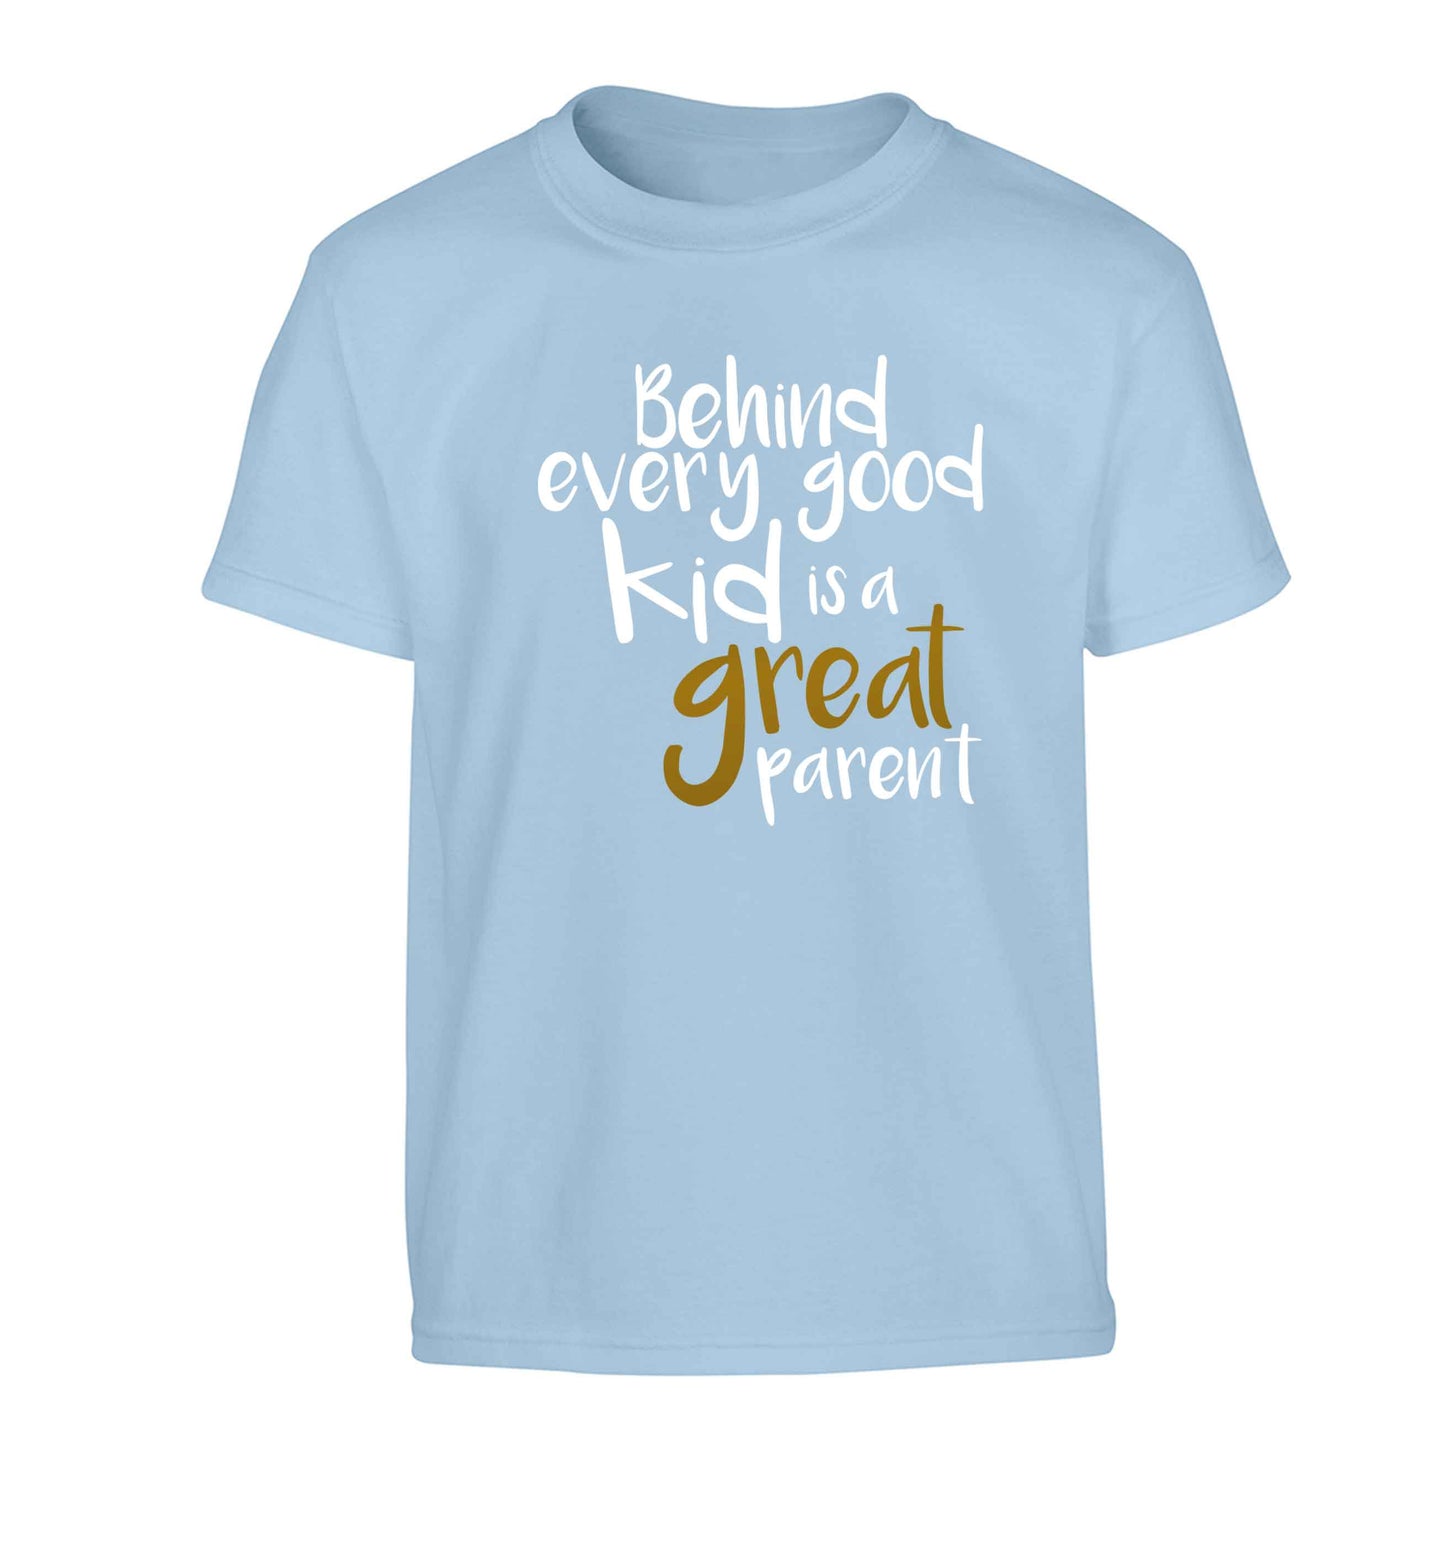 Behind every good kid is a great parent Children's light blue Tshirt 12-13 Years